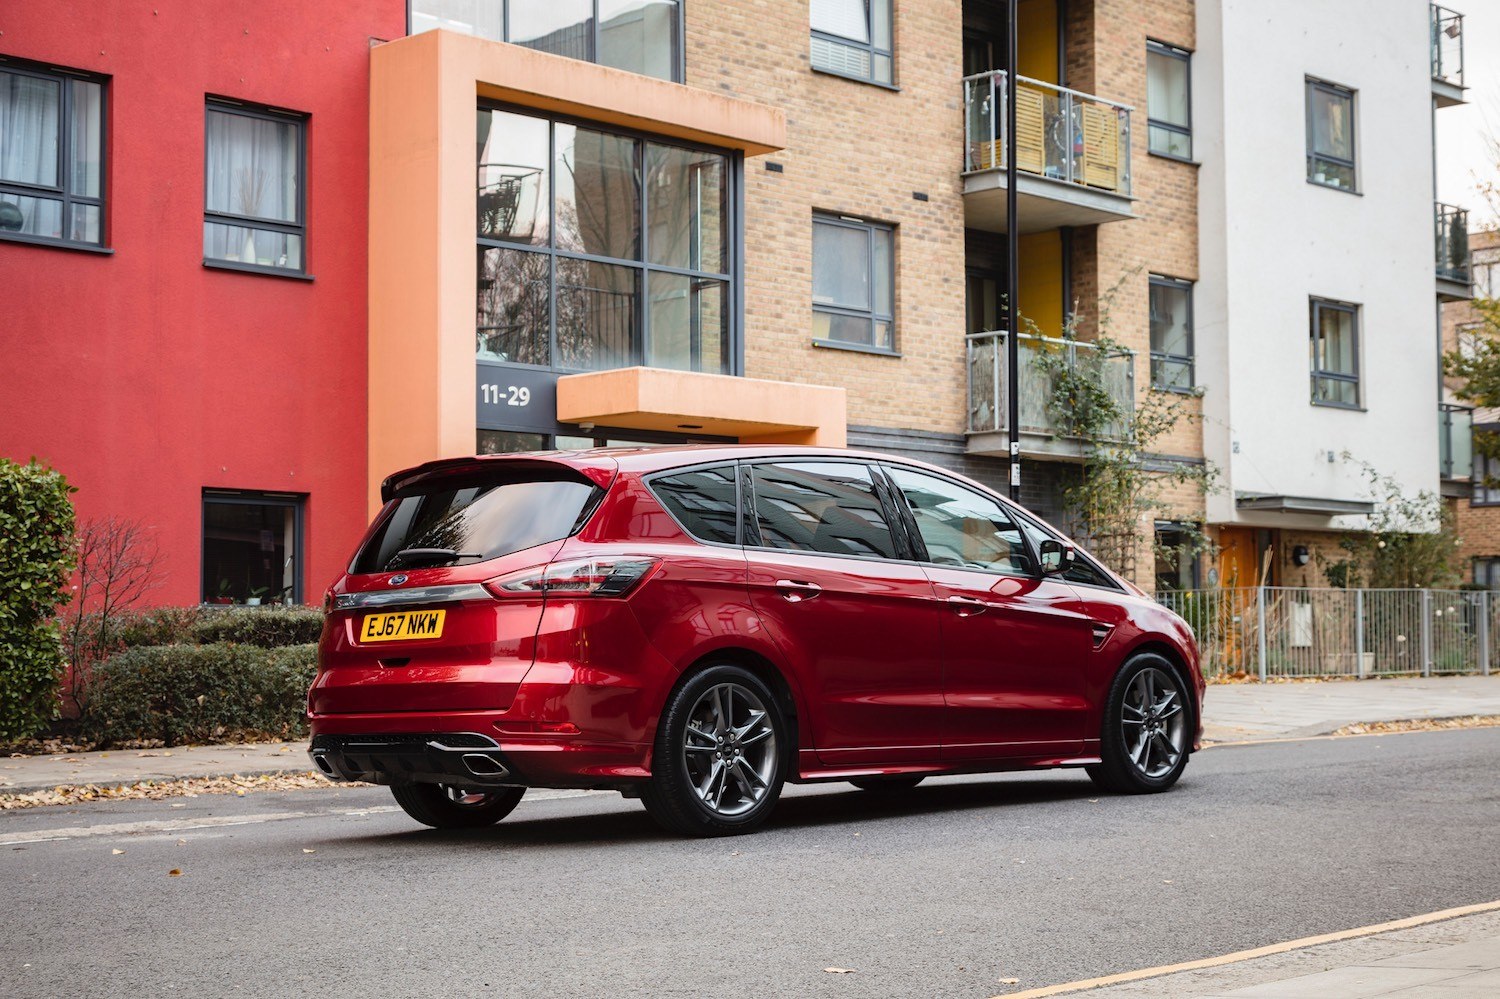 Neil Lyndon reviews the Ford S-Max for Drive 2